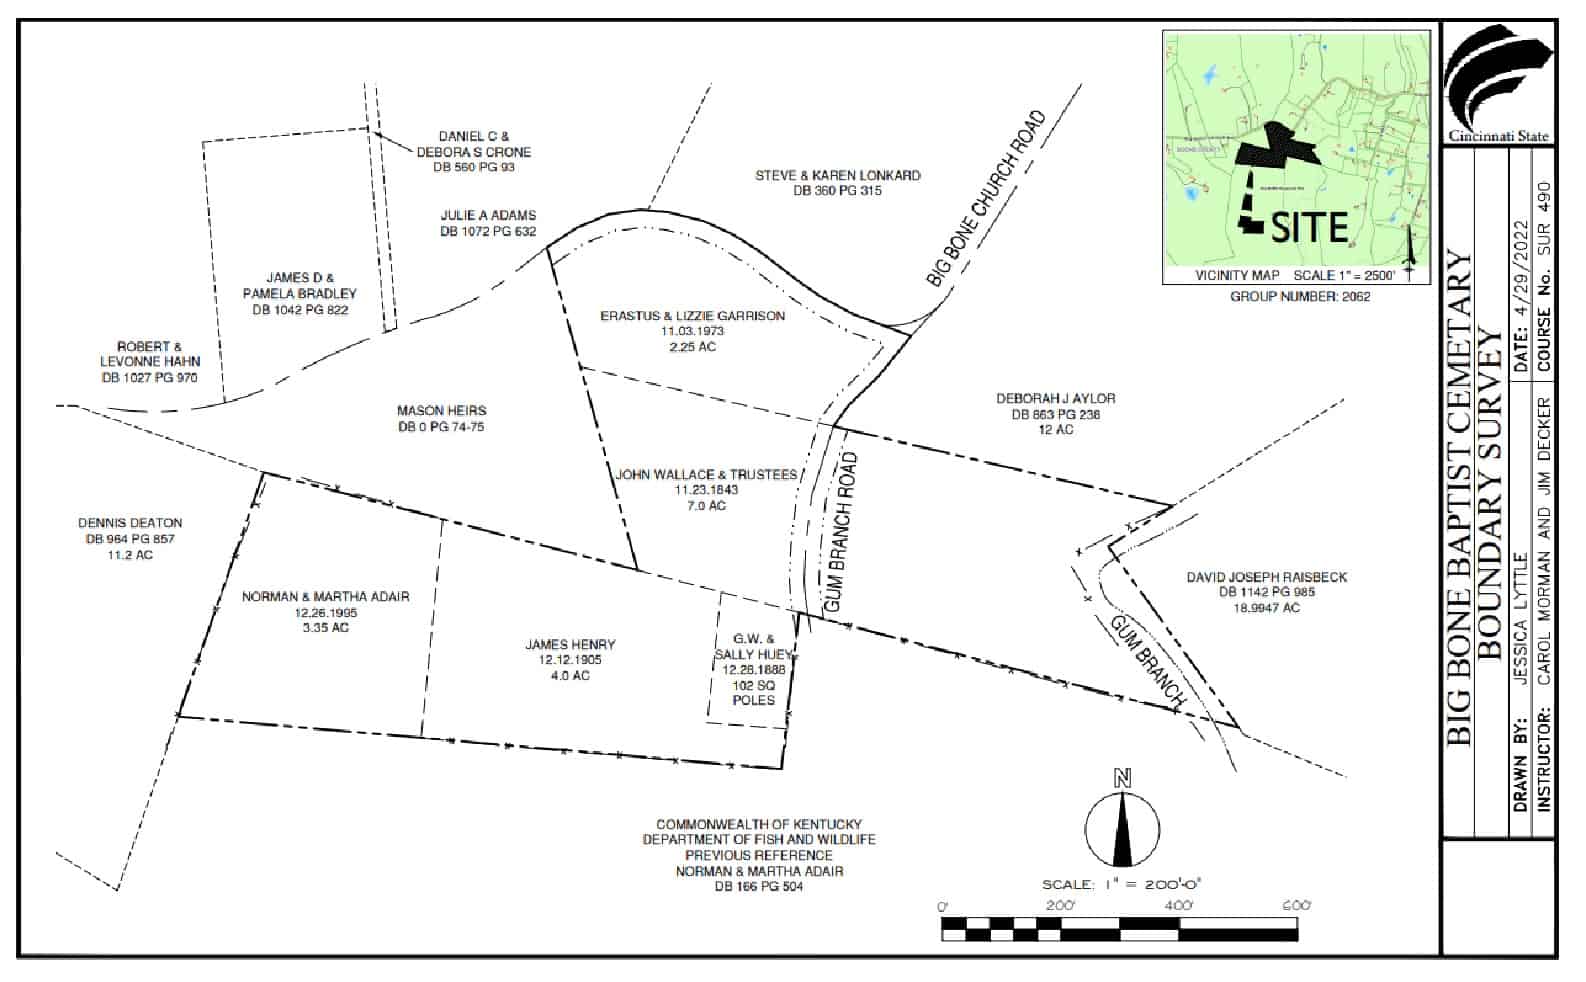 Student-prepared map shows the individual parcels that make up the church property